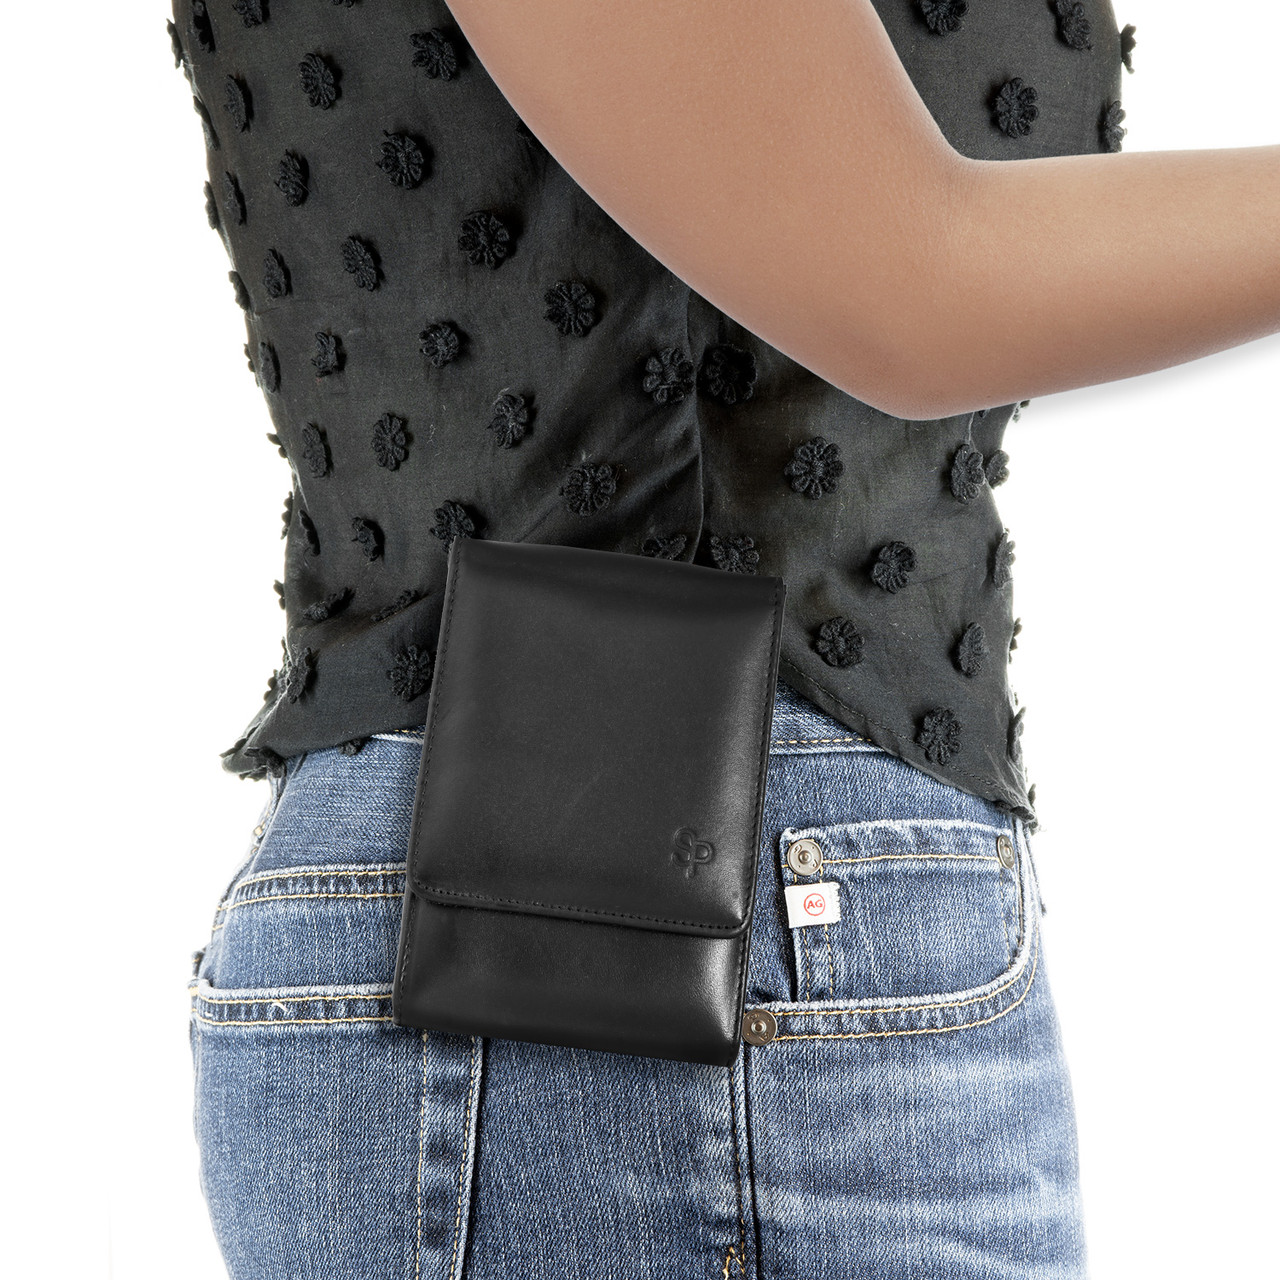 Walther PPK Sneaky Pete Holster